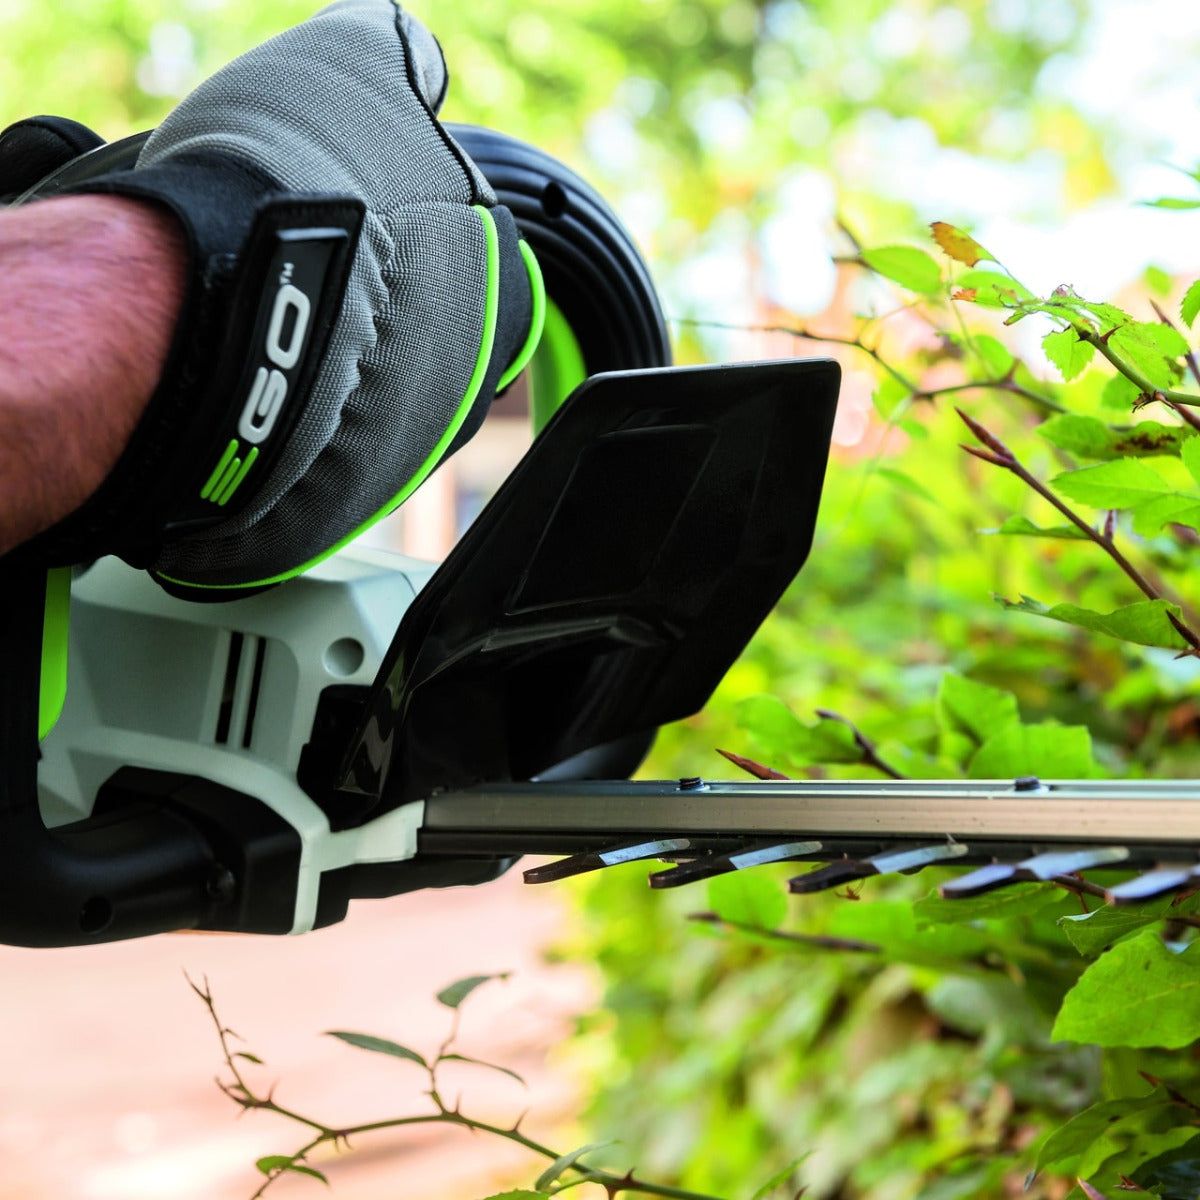 EGO HT2410E Cordless Hedge Trimmer, Body Only